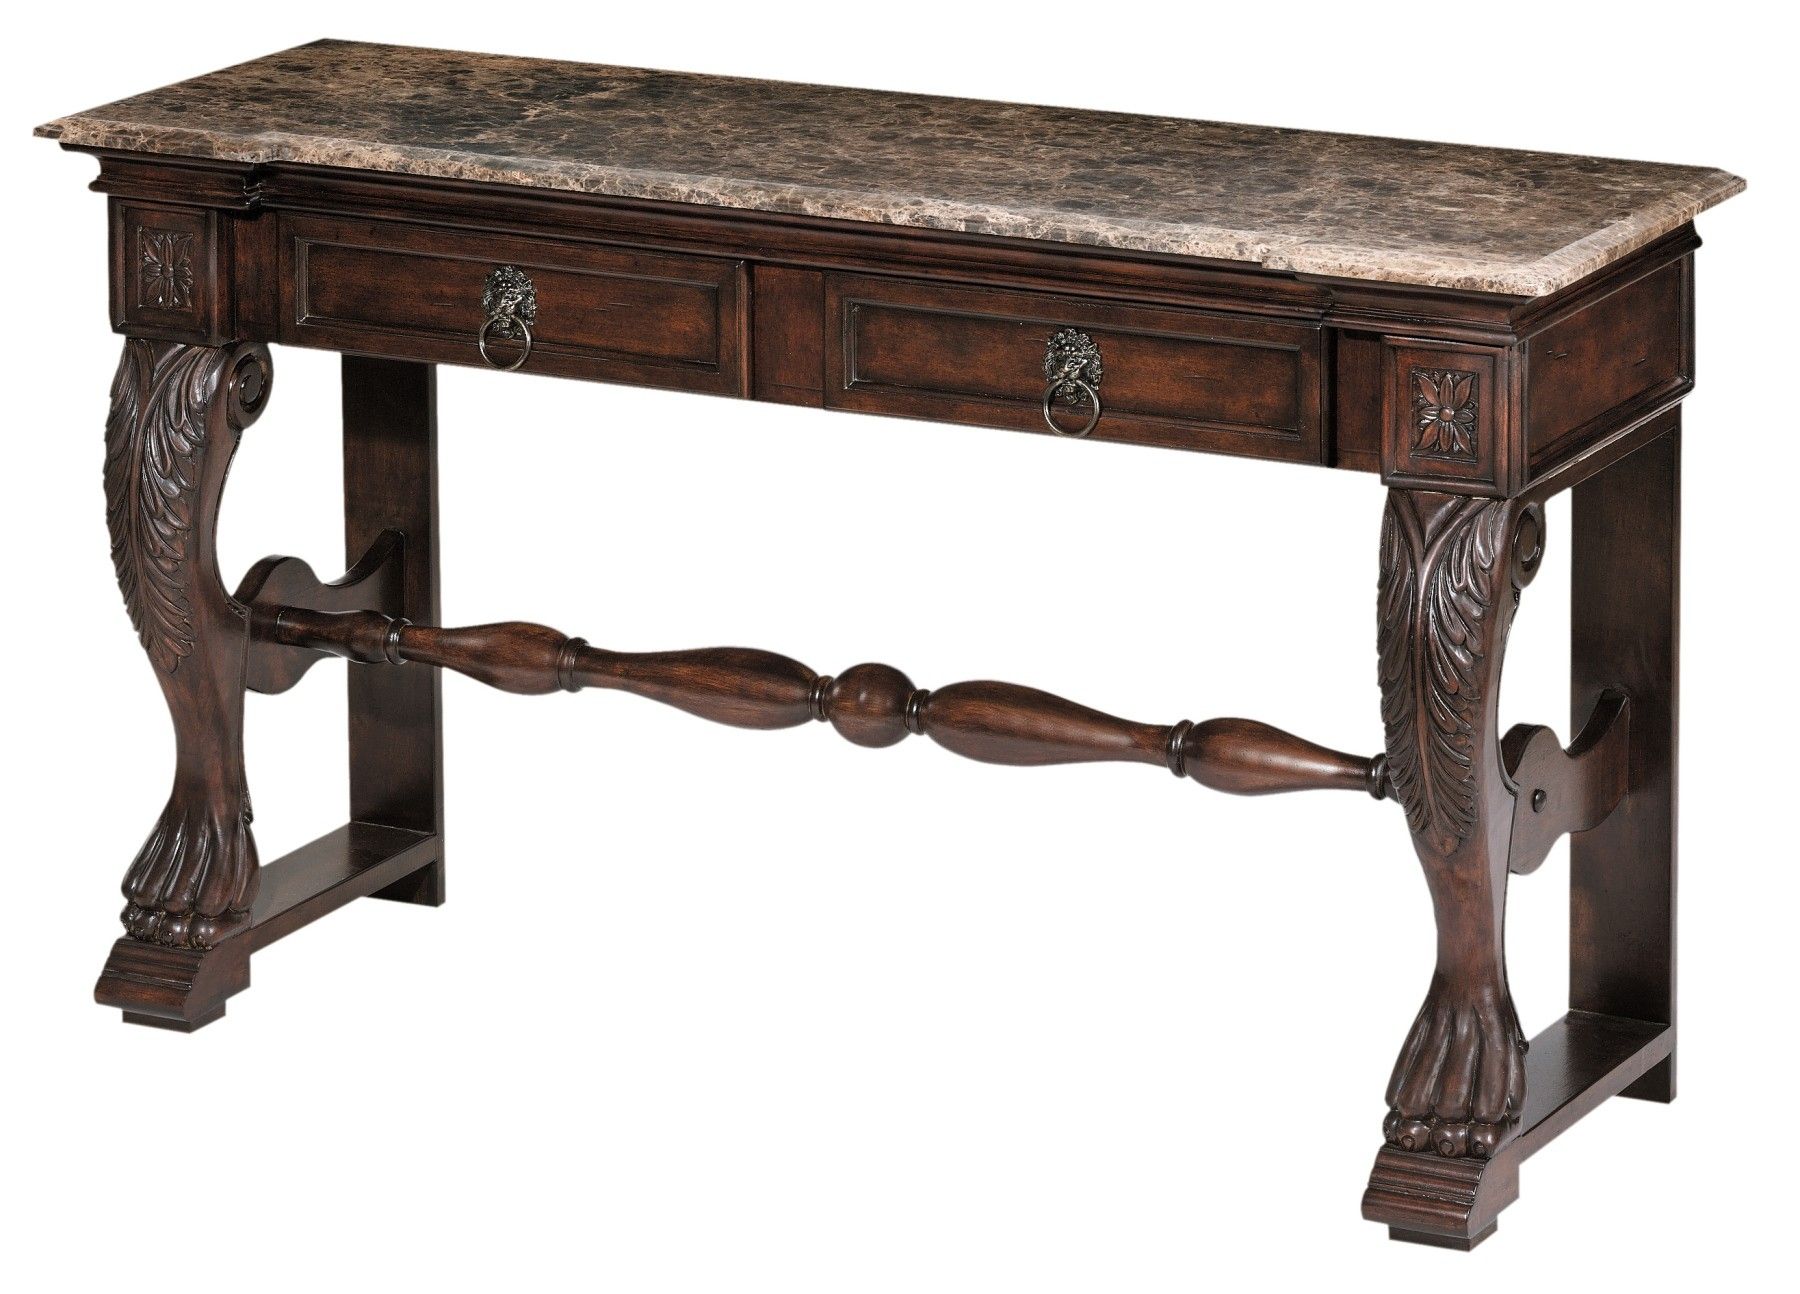 Carved Console Table With Marble Top From Steinworld (22240) | Coleman Inside Marble And White Console Tables (View 19 of 20)